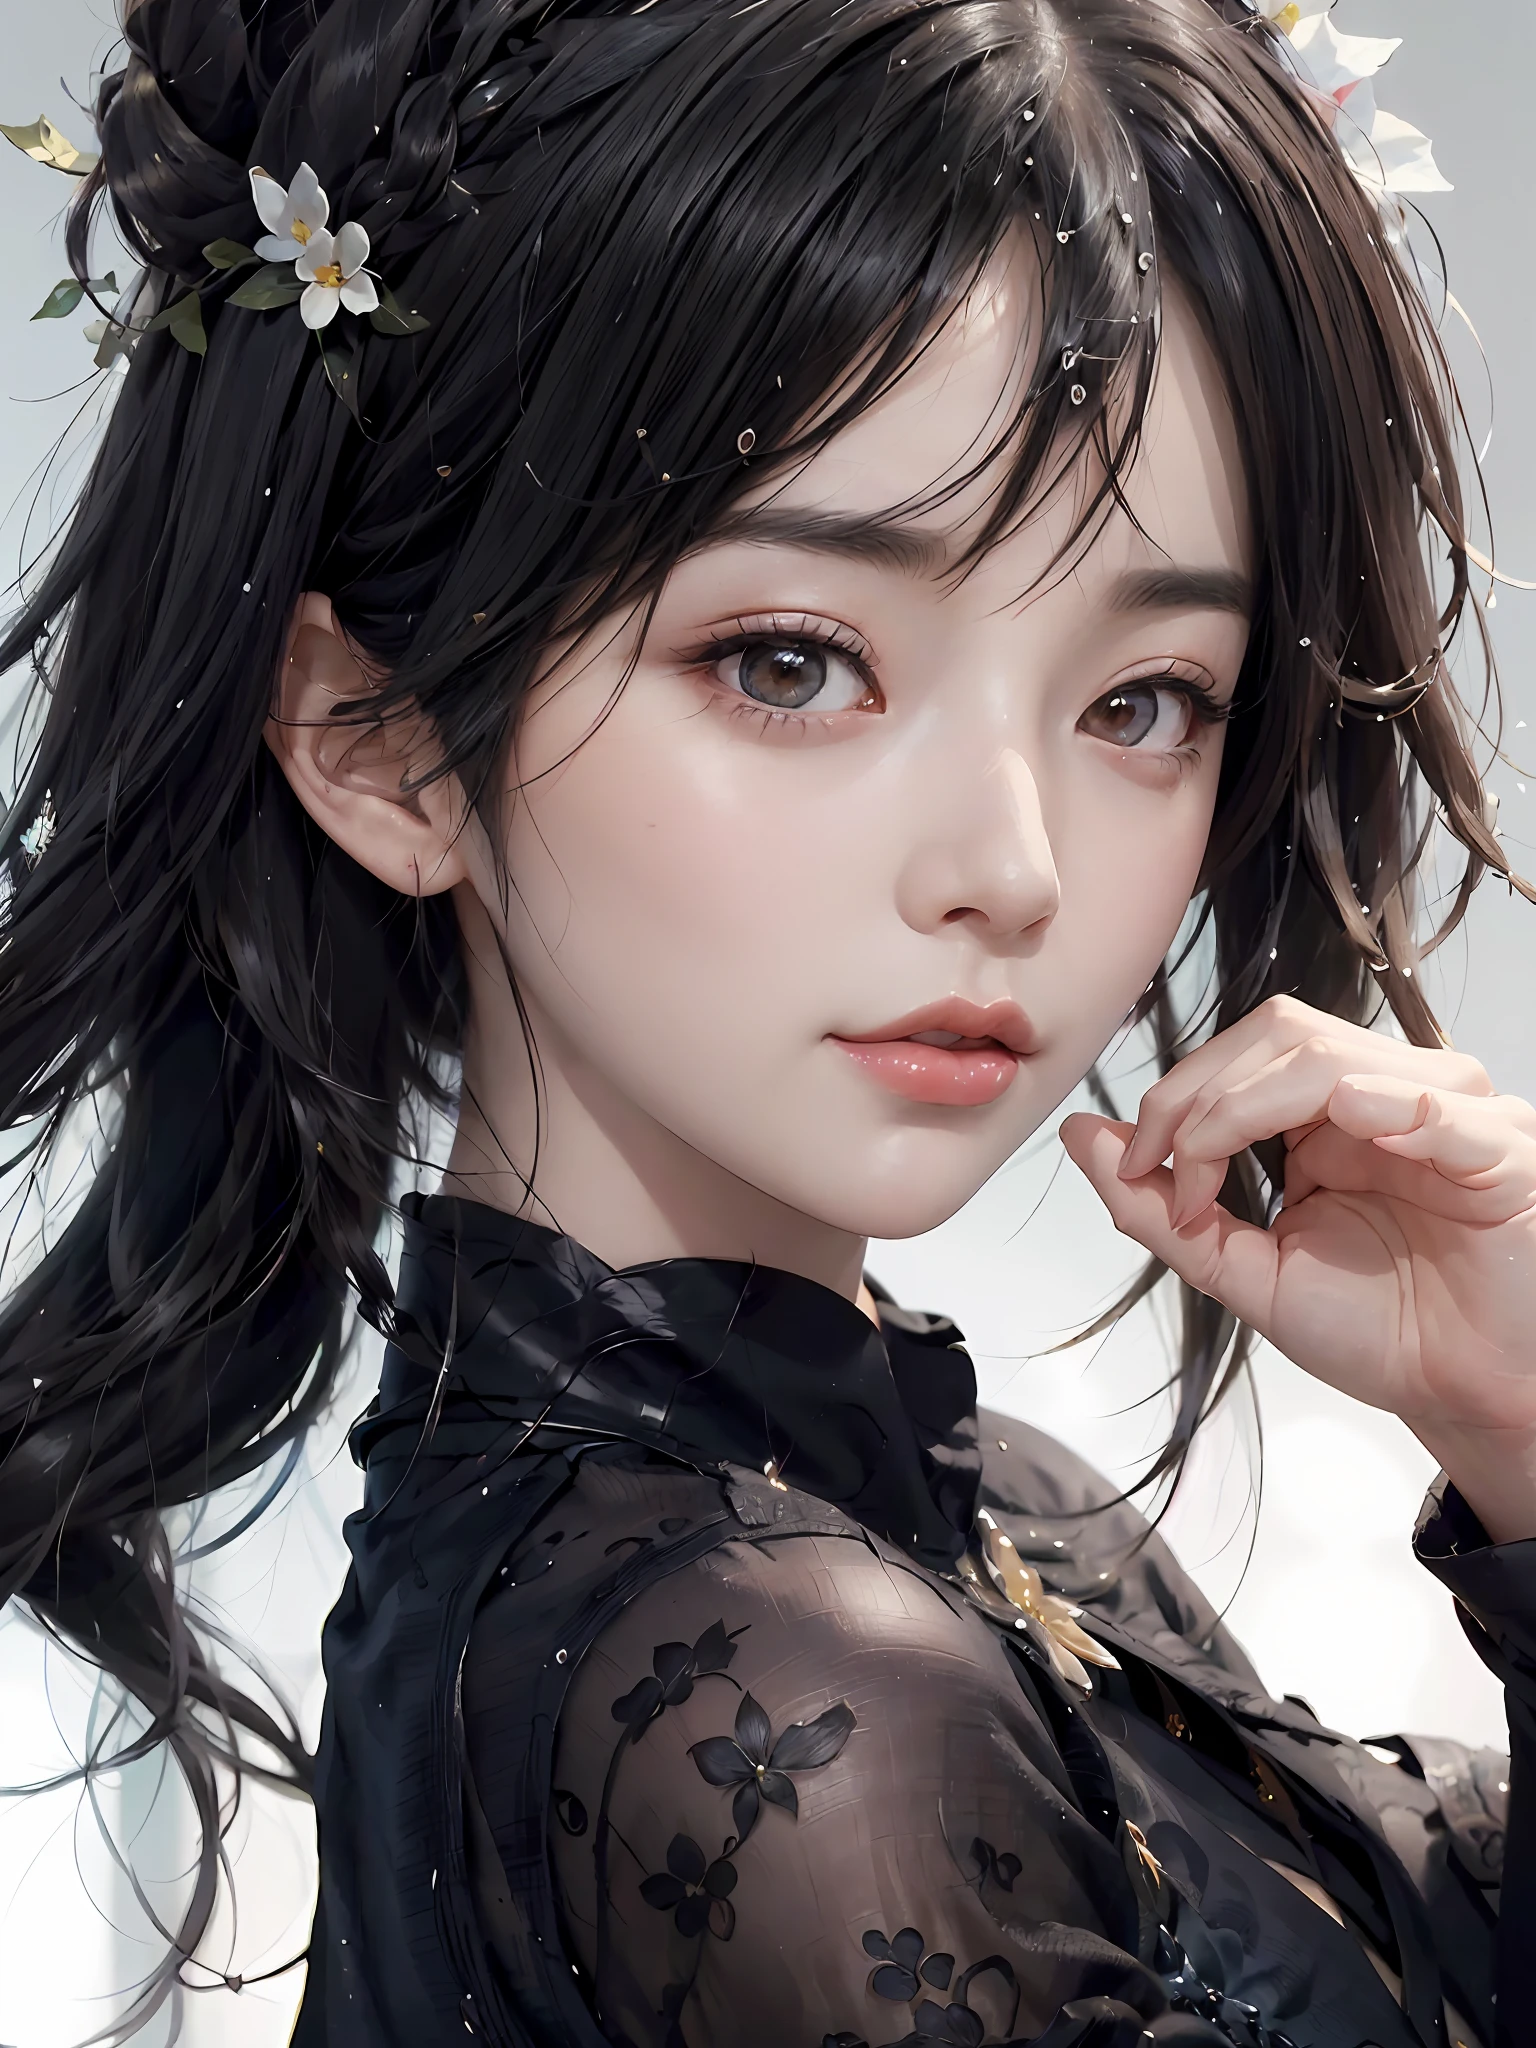 anime girl with black hair and flowers in her hair, artwork in the style of guweiz, extremely detailed artgerm, artgerm portrait, detailed portrait of anime girl, artgerm. anime illustration, artgerm. high detail, beautiful anime portrait, by Yang J, guweiz, stunning anime face portrait, rossdraws portrait